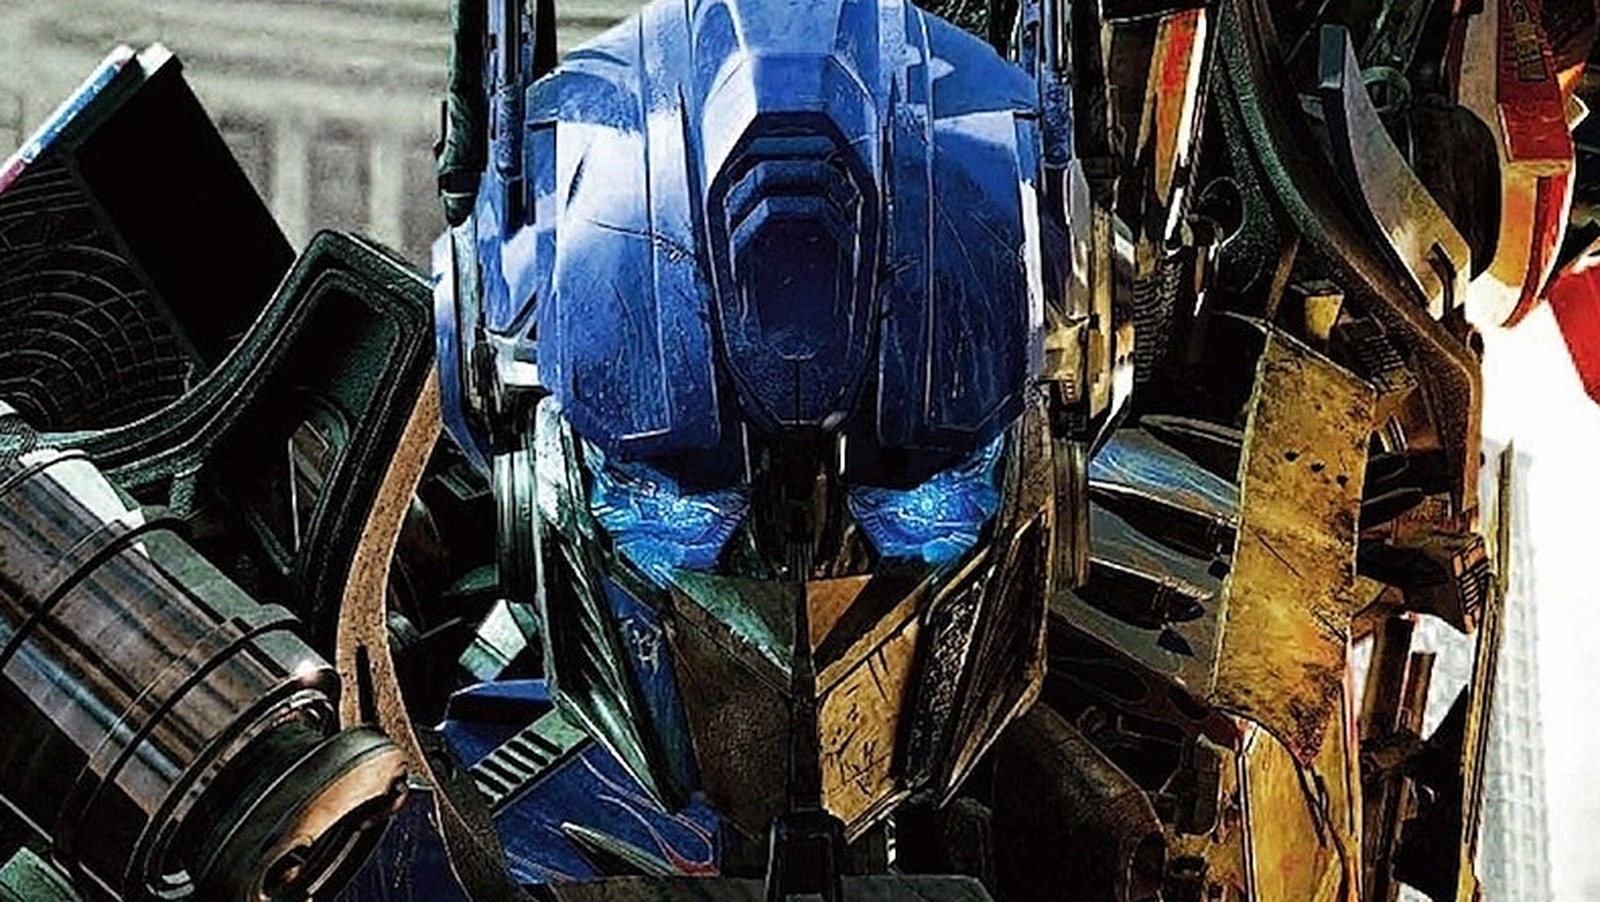 The film Transformers: Rise Of The Beasts will be released on June 24, 2022, by Paramount Pictures.